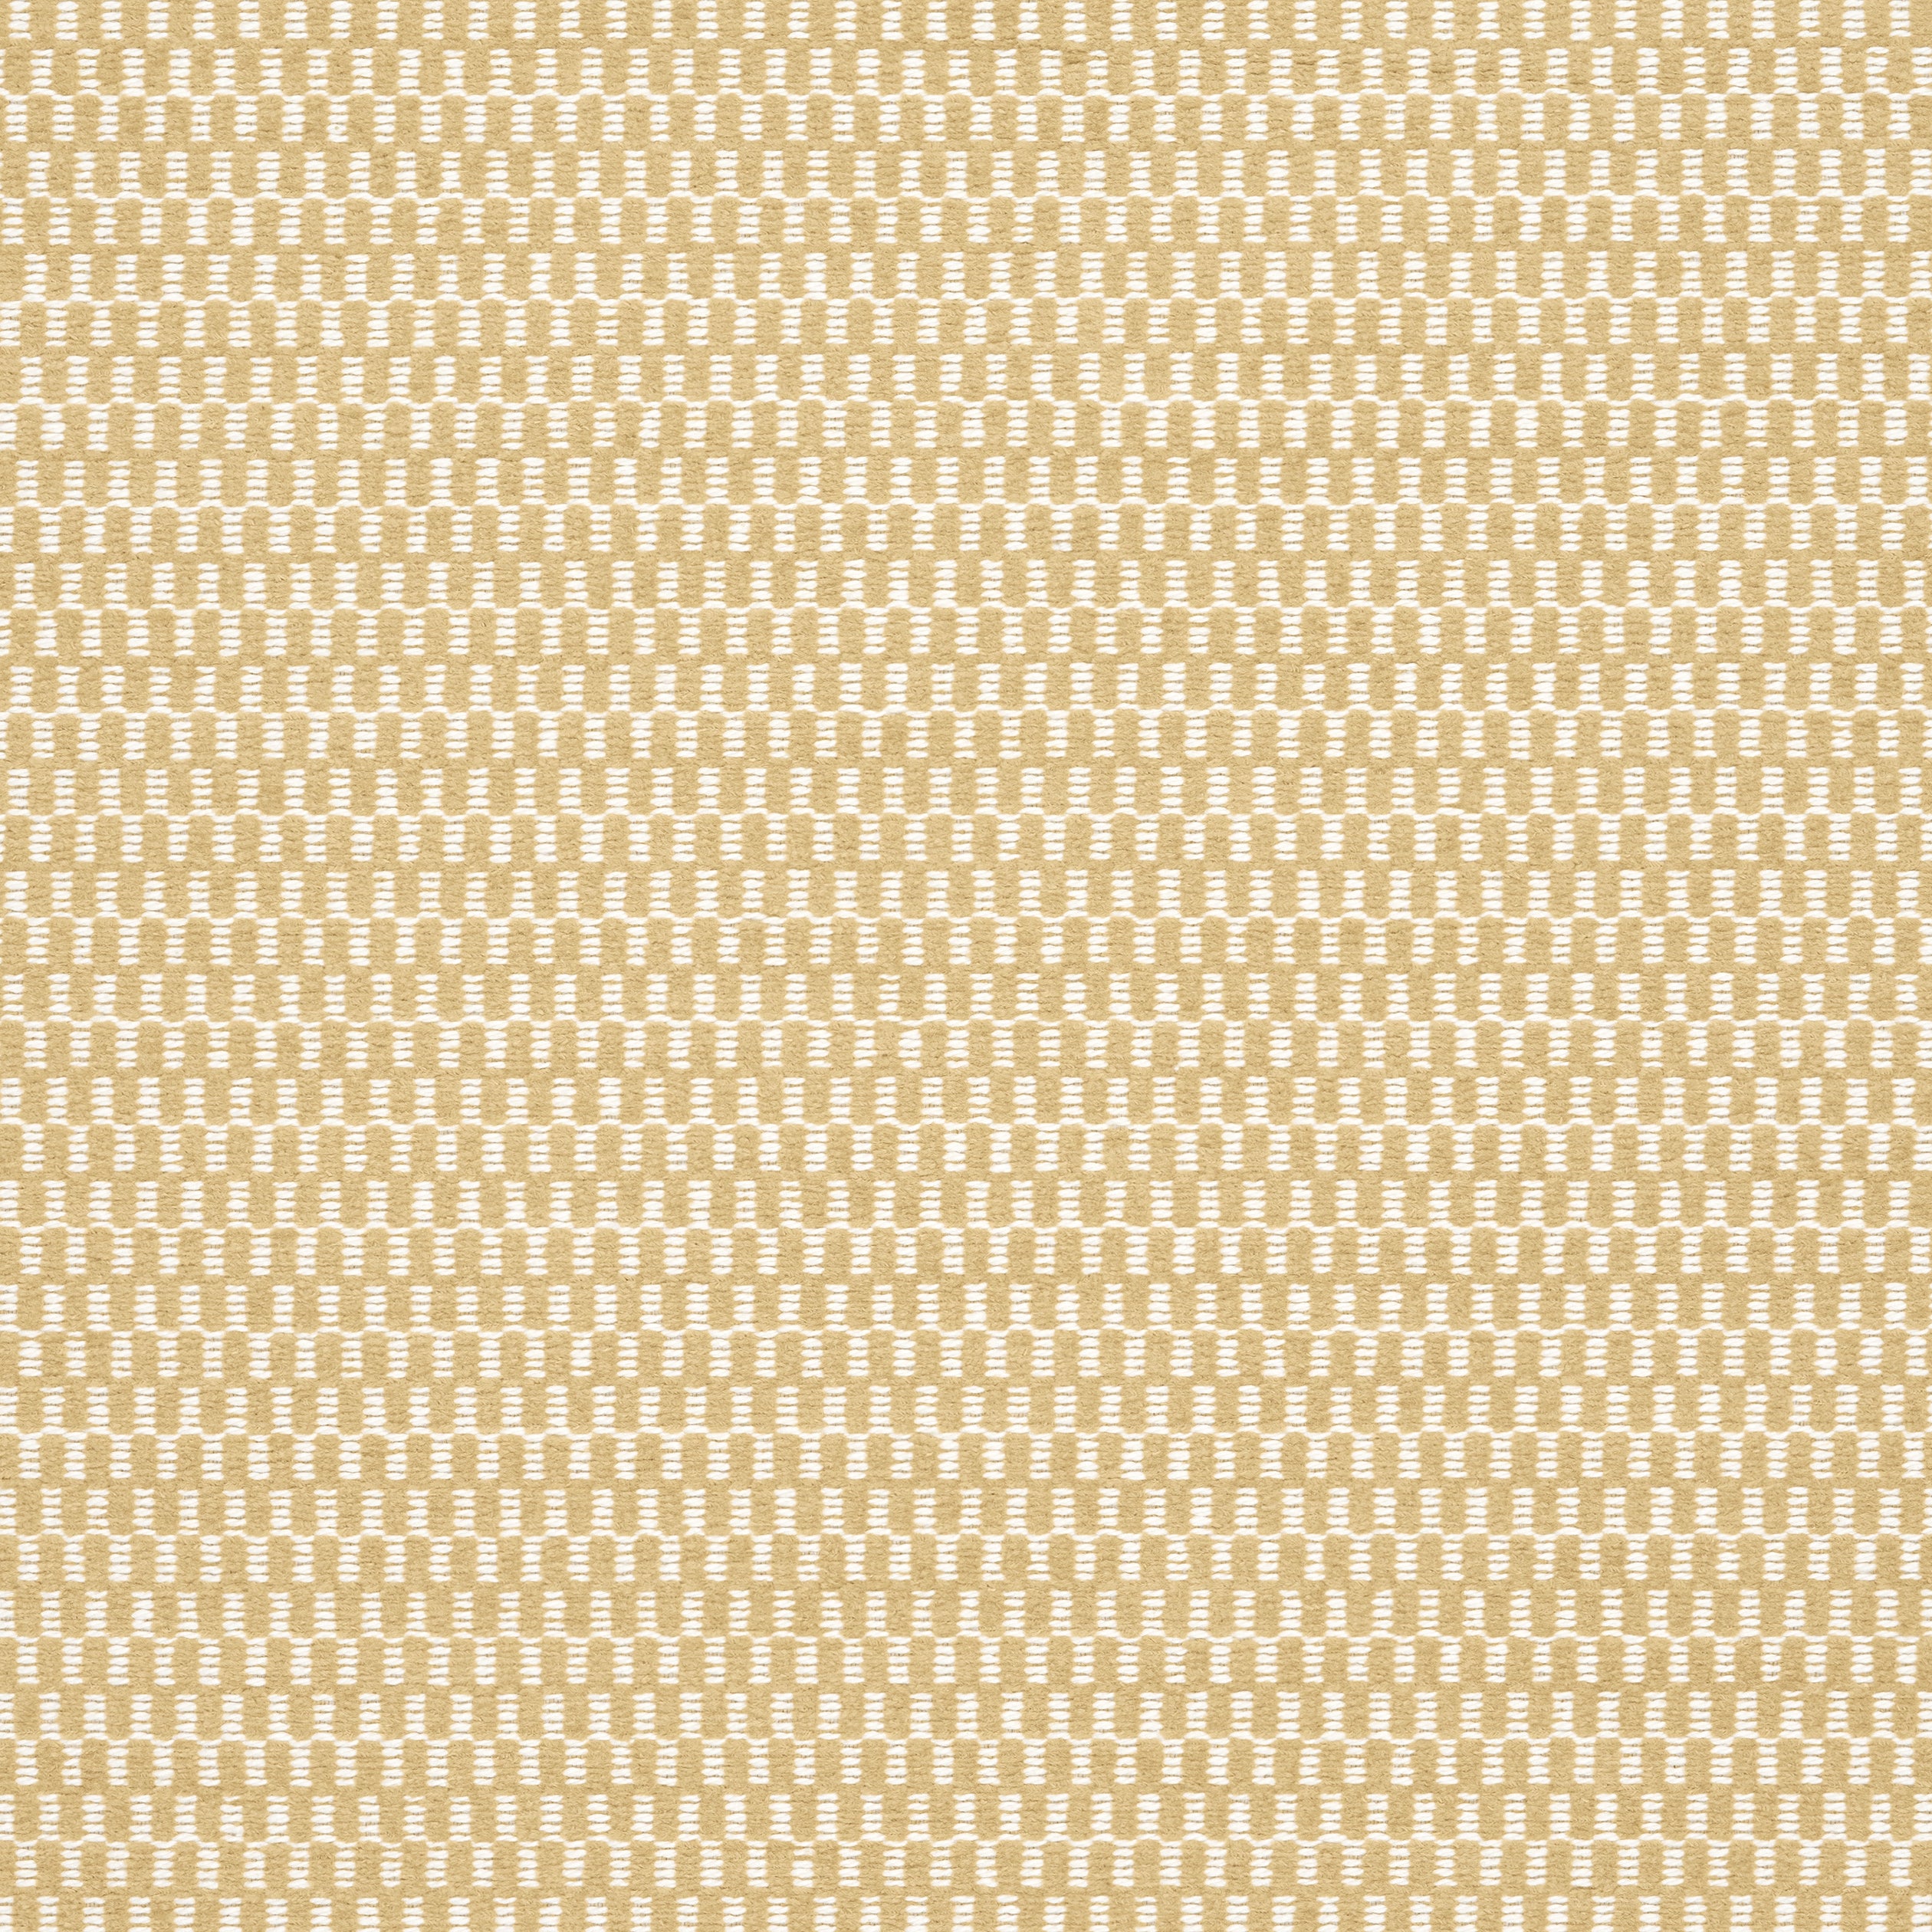 Block Texture fabric in sand color - pattern number W74243 - by Thibaut in the Passage collection